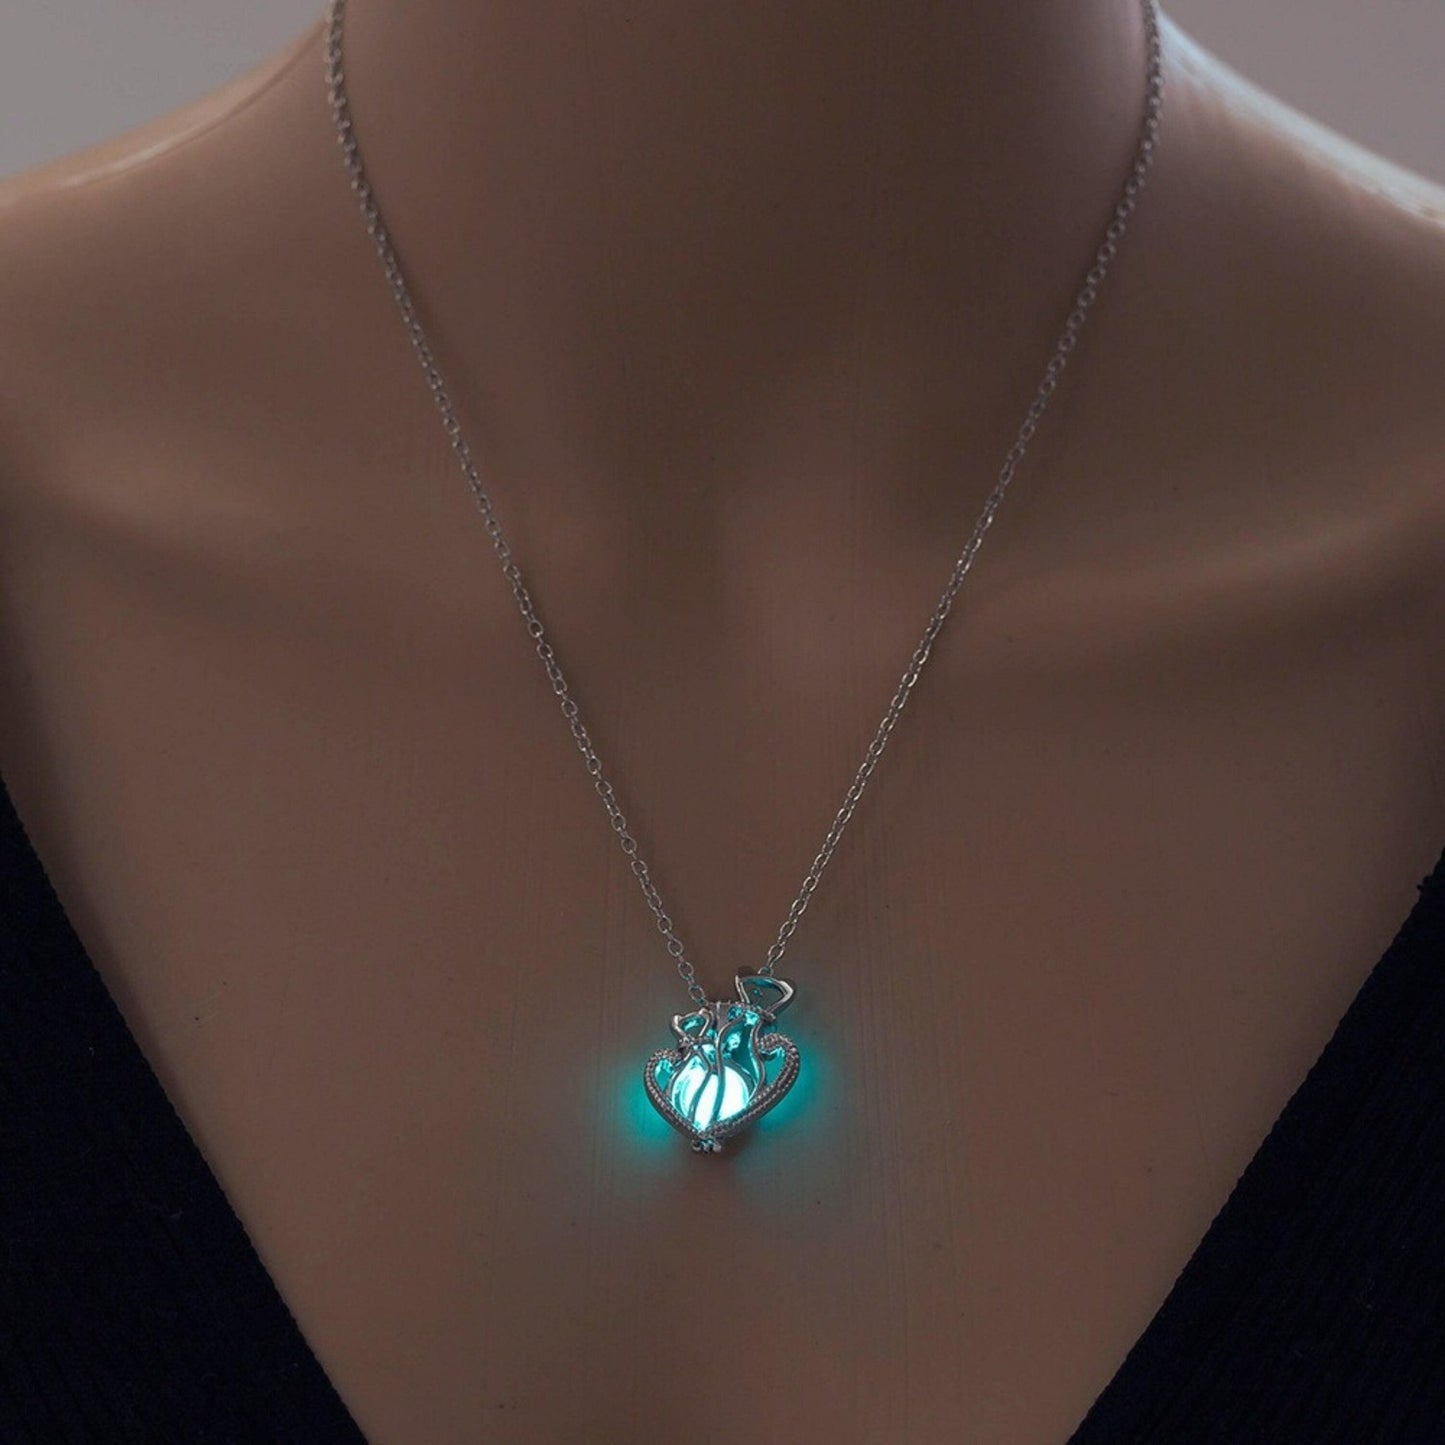 Luminous Cat and Moon Necklace - Space Mesmerise - Space Gifts | Lamps | Statues | Home Decor